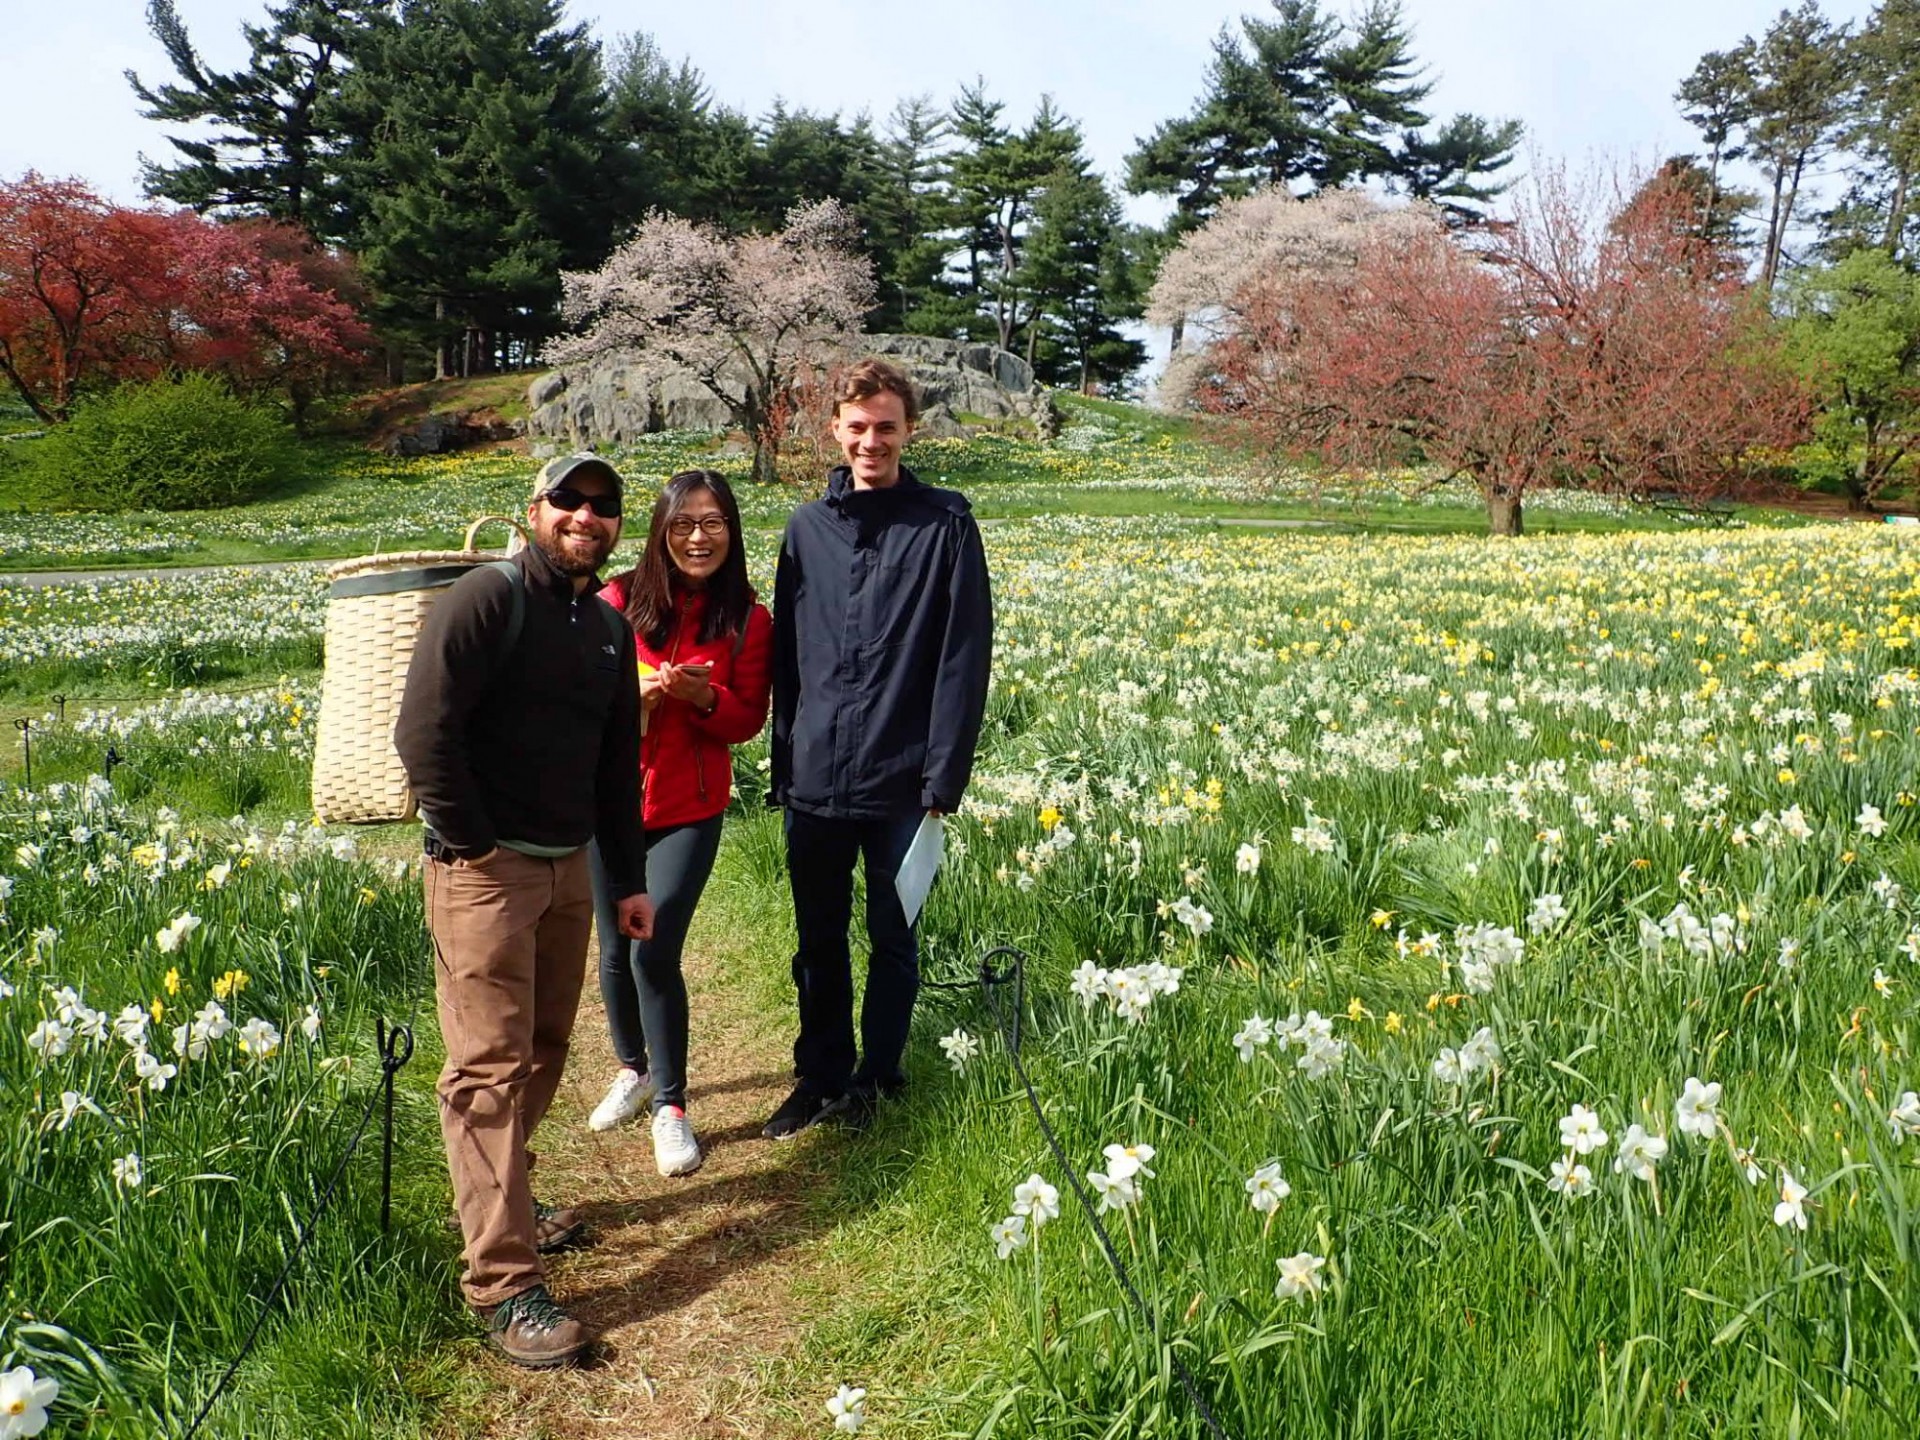 Andy, Dandan and Andrew pose among the daffodils at the New York Botanical Garden